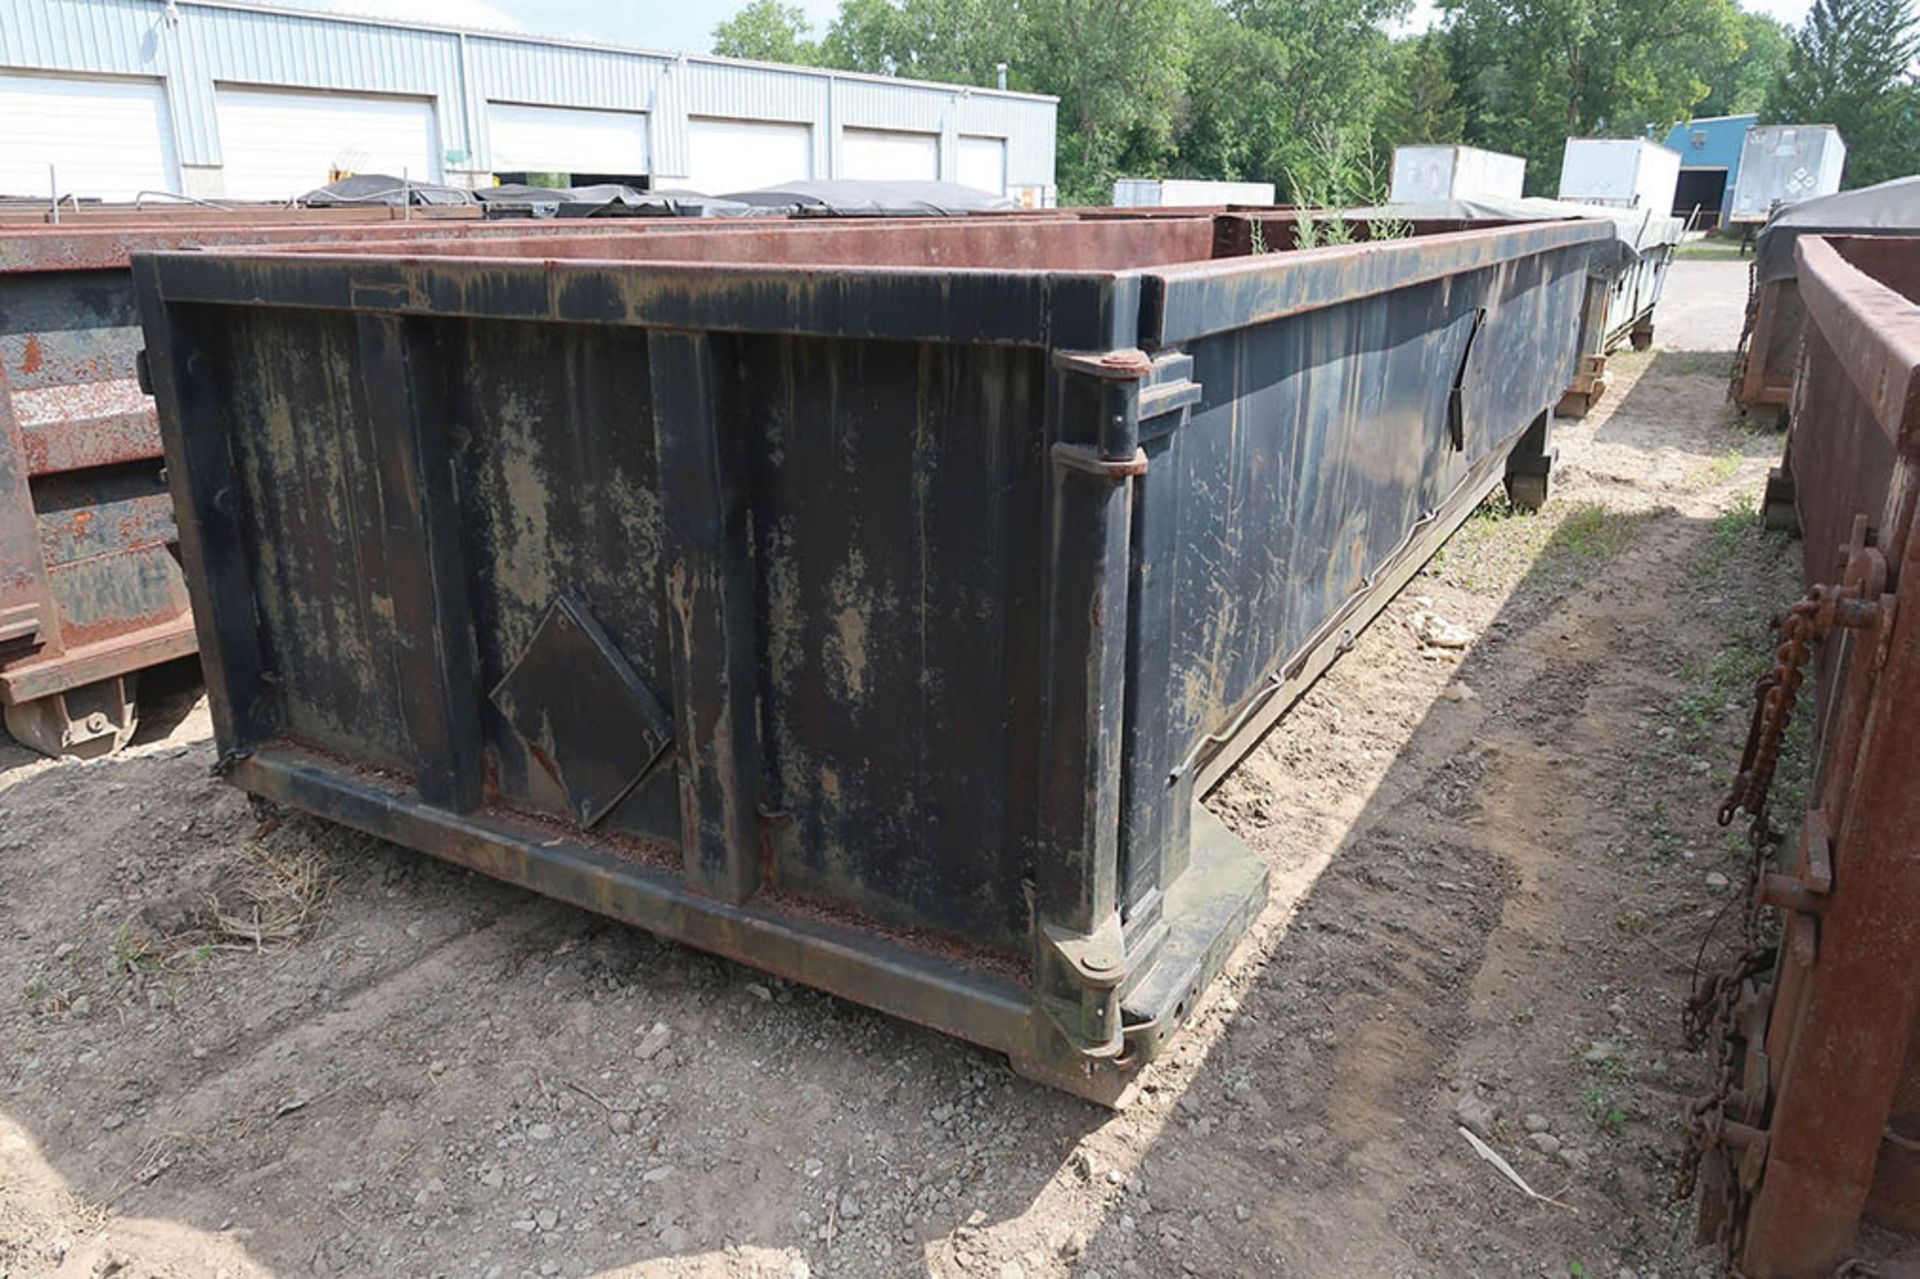 20 CUBIC YARD ROLL OFF CONTAINER, RB34 - Image 2 of 3